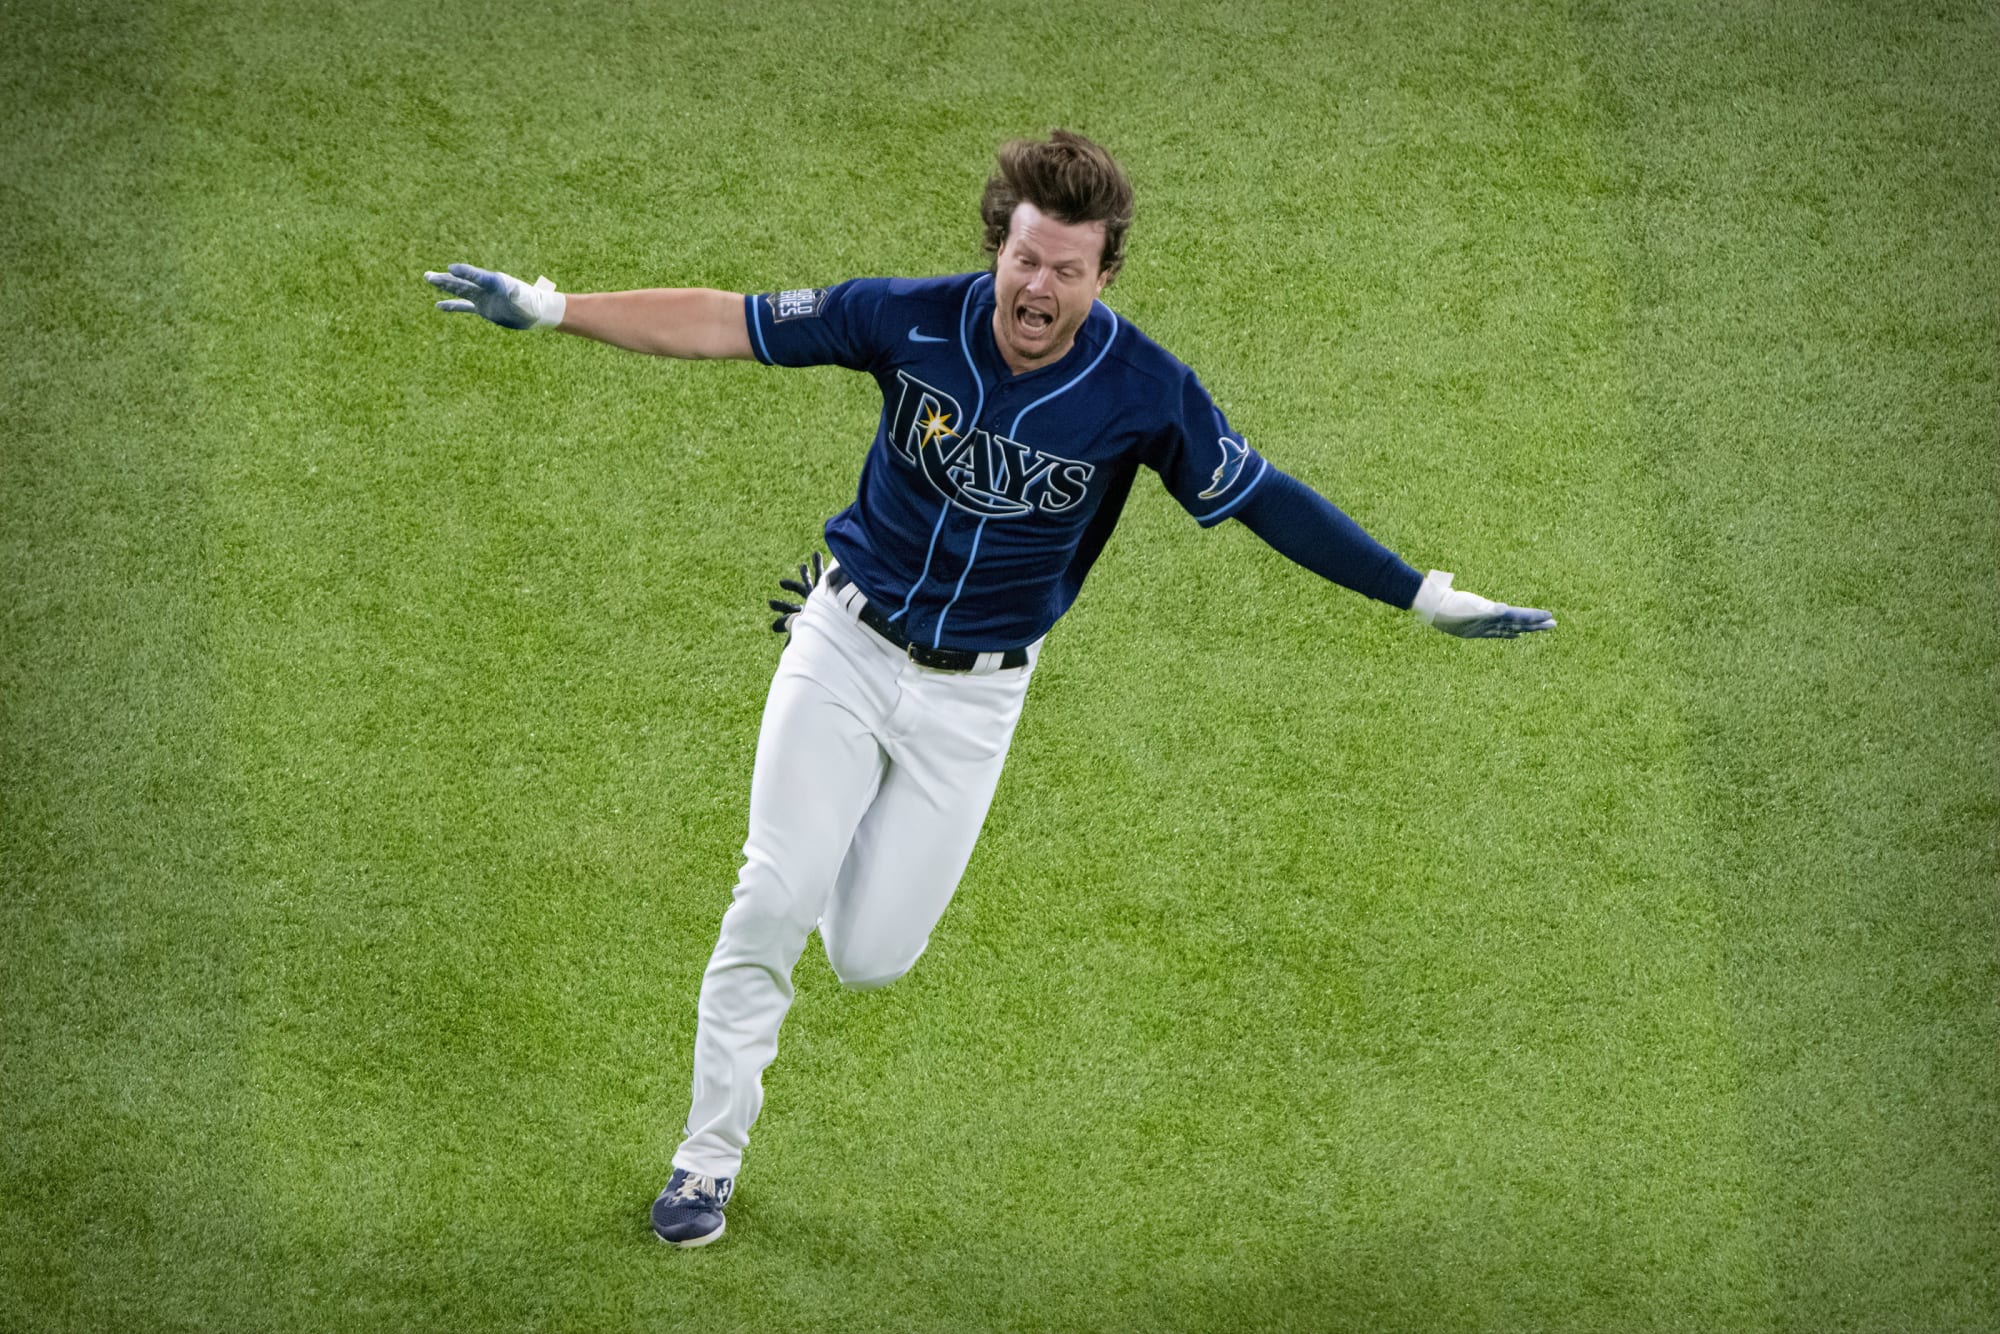 Phillips plays the hero role again as Rays get walk-off win